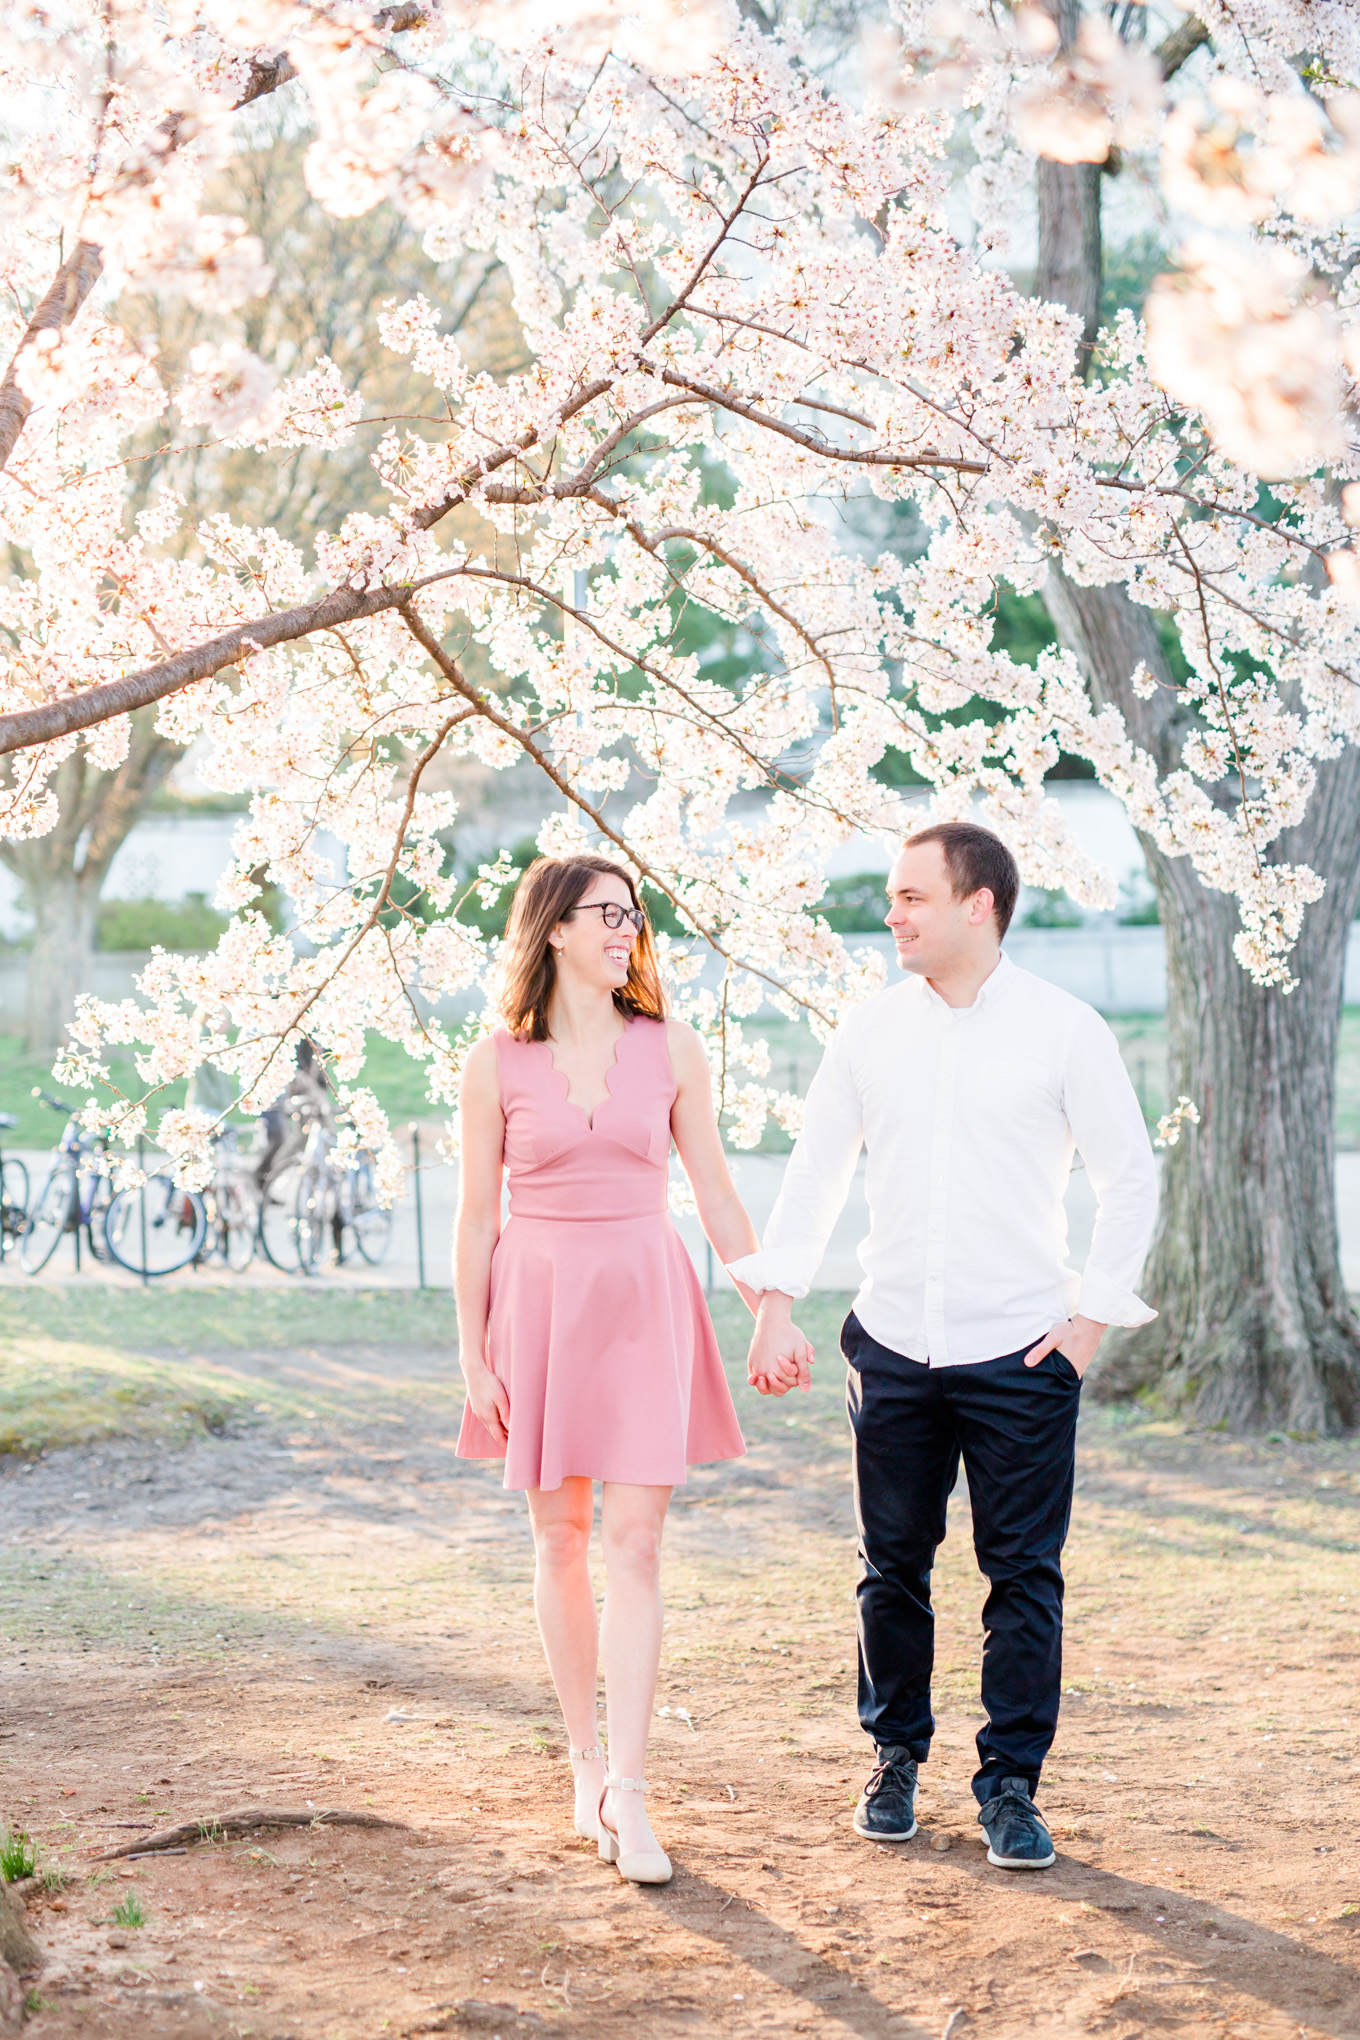 sunny cherry blossoms engagement session, Washington, D.C. engagement photos, Washington D.C. engagement photos, sunrrise engagement photos, cherry blossom engagement photos, D.C. cherry bloossoms, D.C. cherry blossoms photos, cherry blossom photos, cherry blossoms portrraits, sunny engagement photos, classic engagement photos, Rachel E.H. Photography, engagement session style, couple holding hands, couple walking